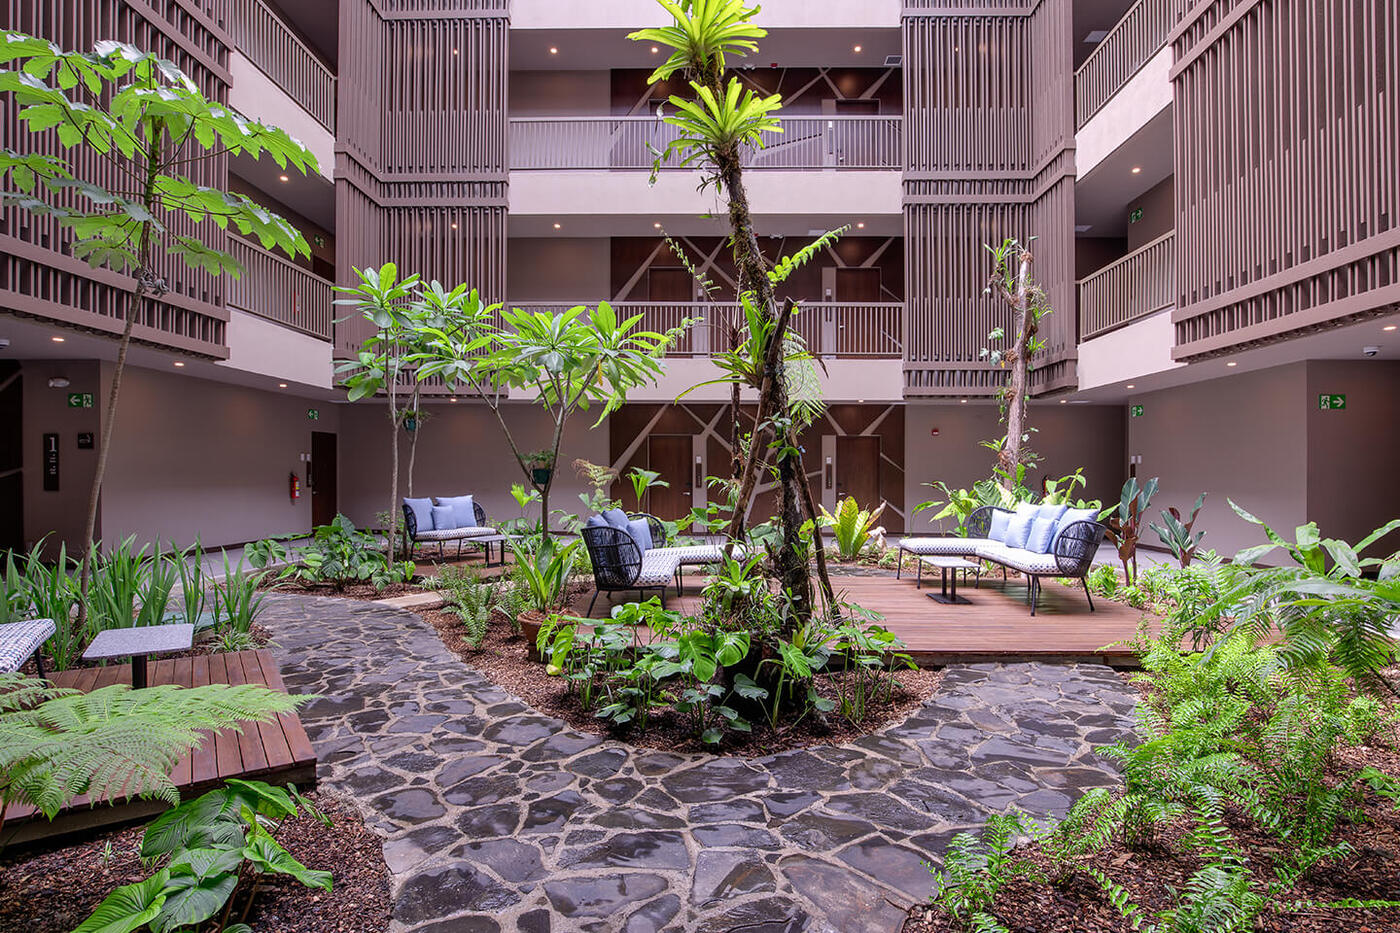 Interior courtyard with greenery and seating